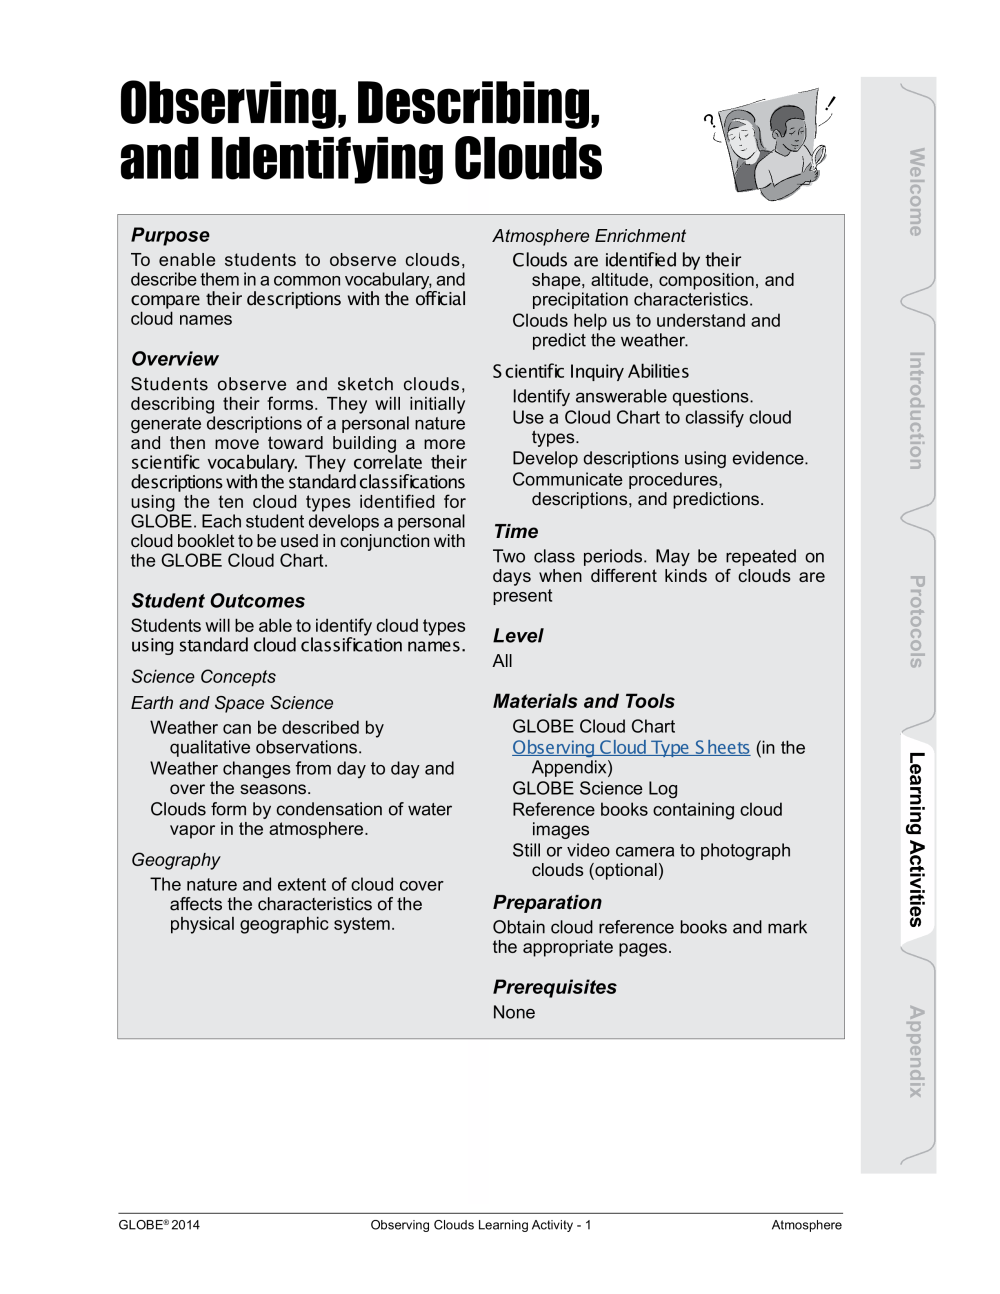 Learning Activities preview for Observing, Describing, and Identifying Clouds